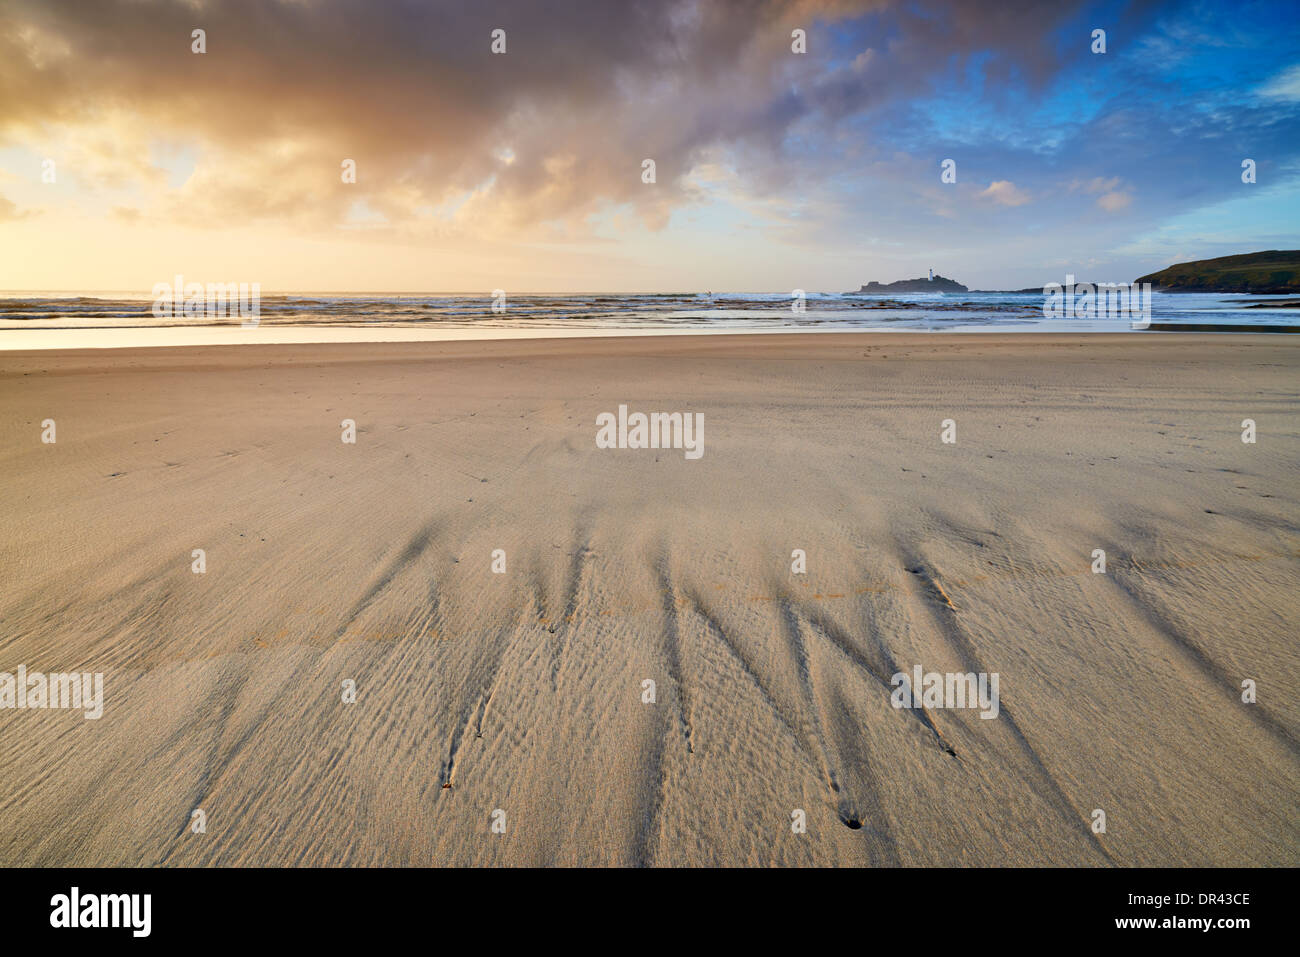 The evening shoreline at Gwithian beach with patterns in the sand left by the retreating tide Stock Photo